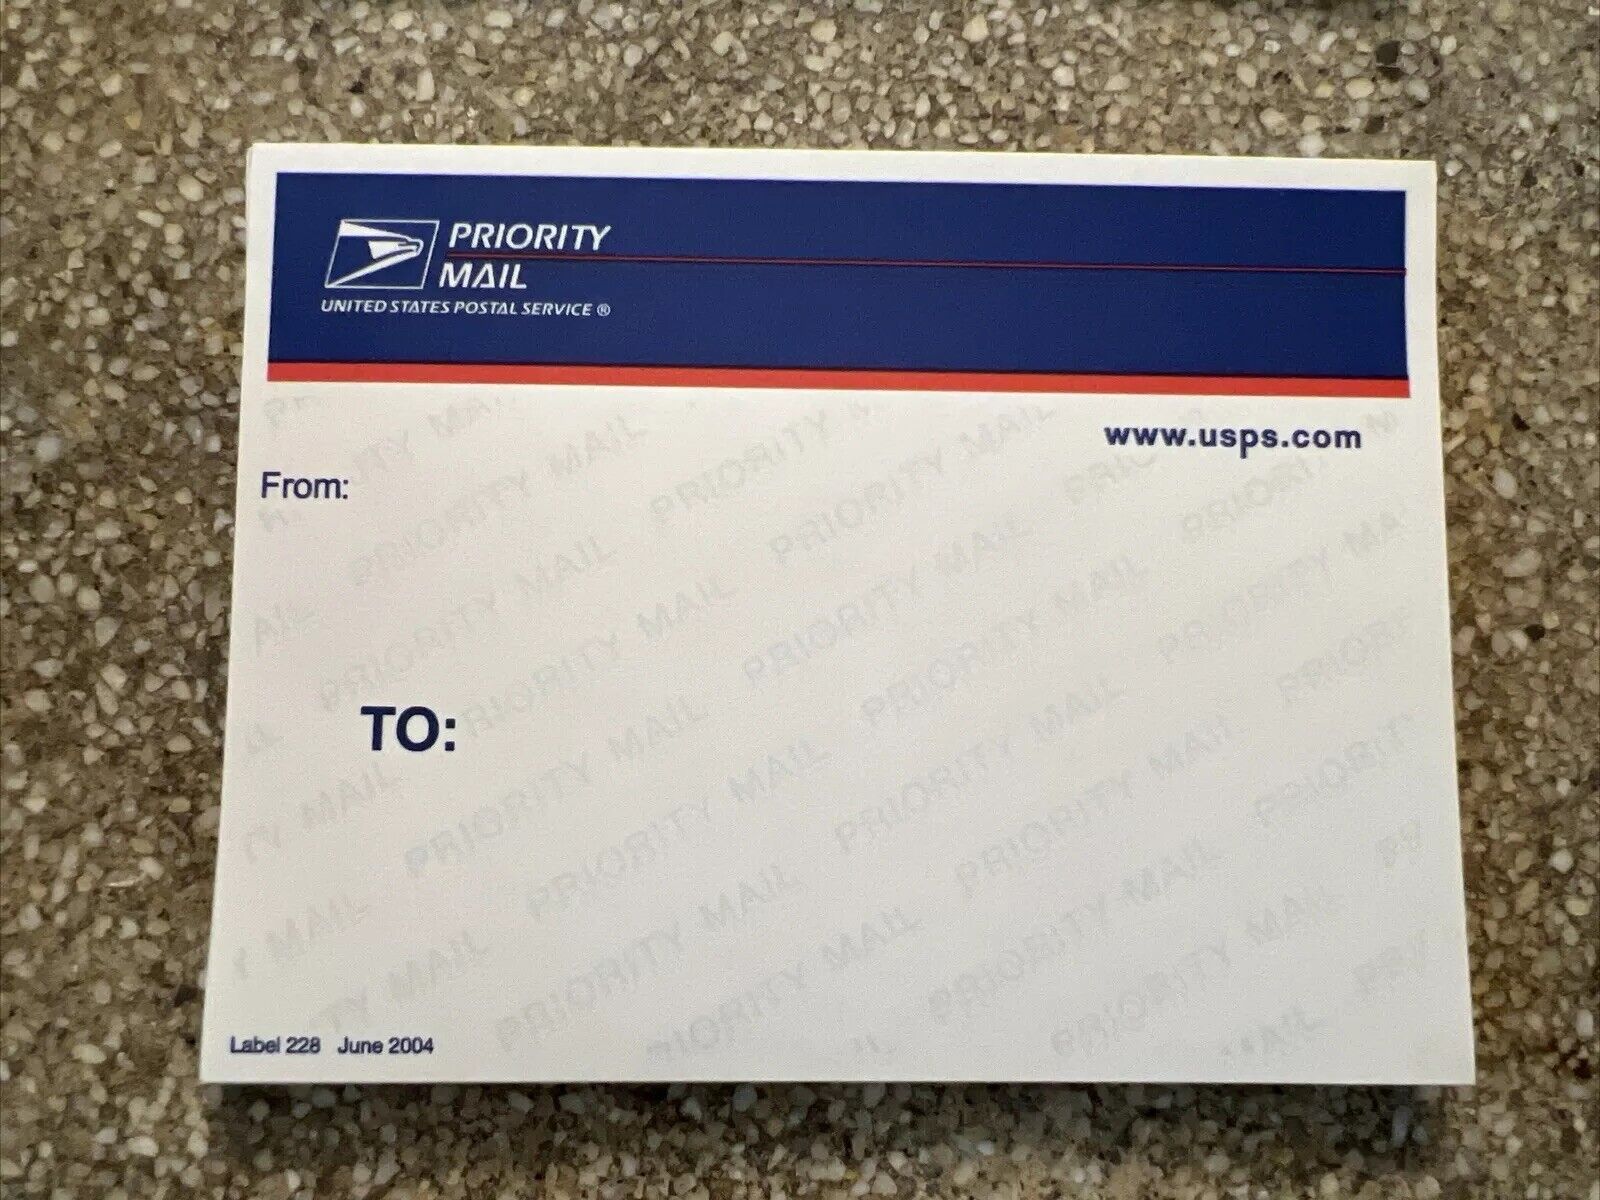 Rare Vintage USPS Priority Mail Stickers Label 228 June 2004 (25 Pack Each)